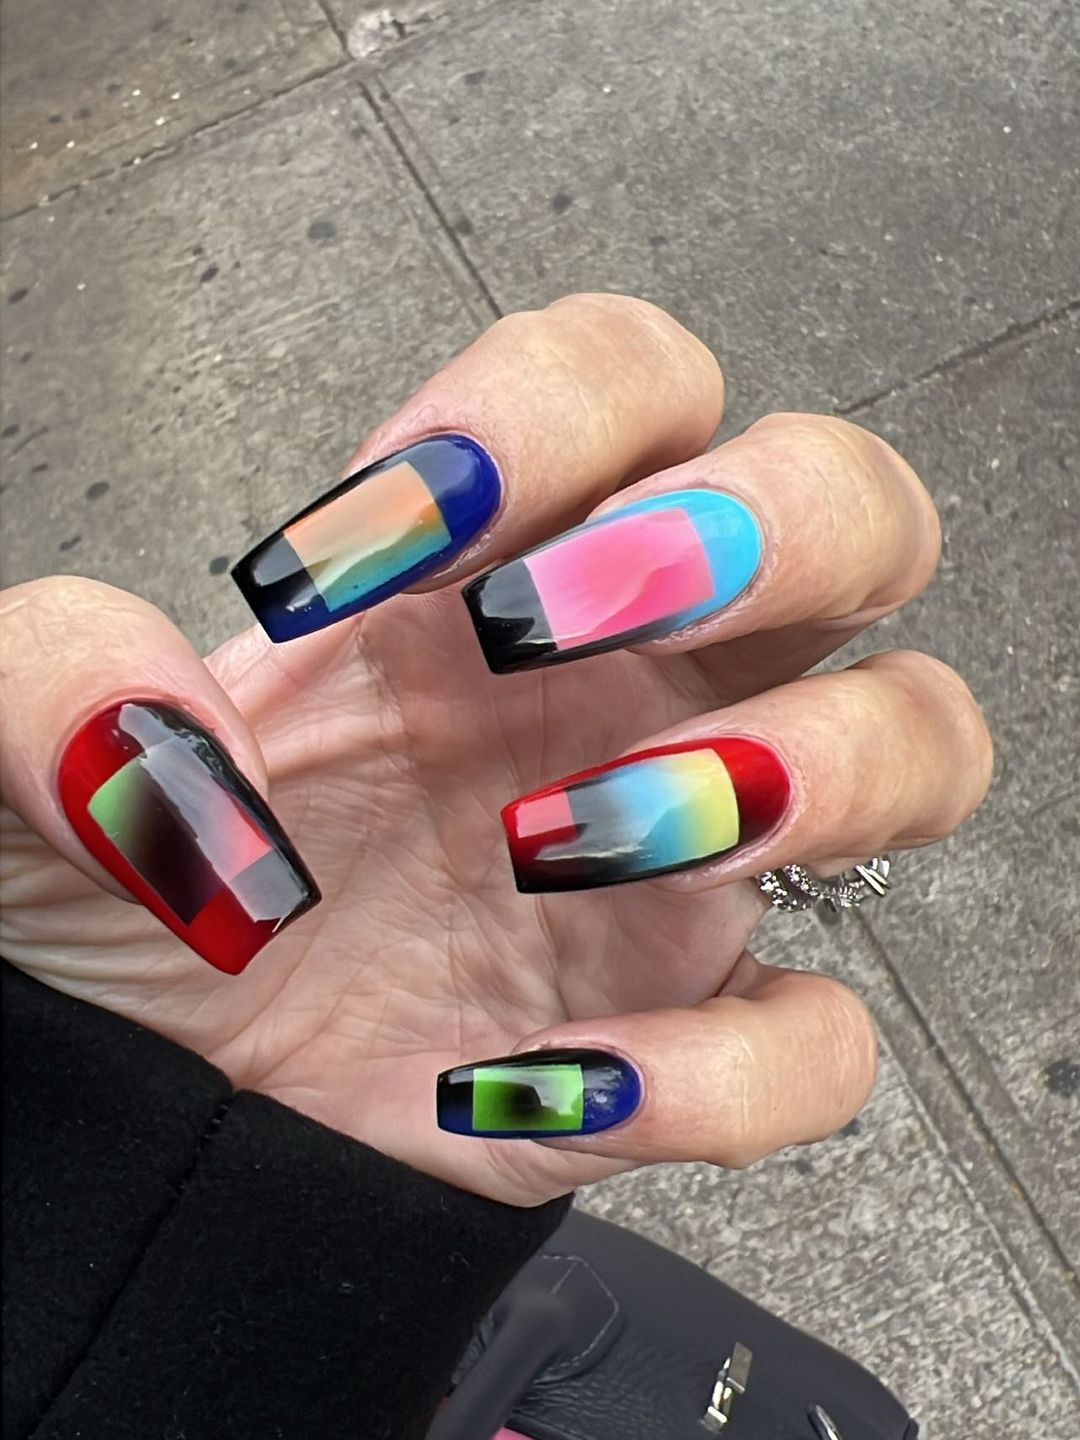 Lily Allen showed off the photos of her manicure on Instagram